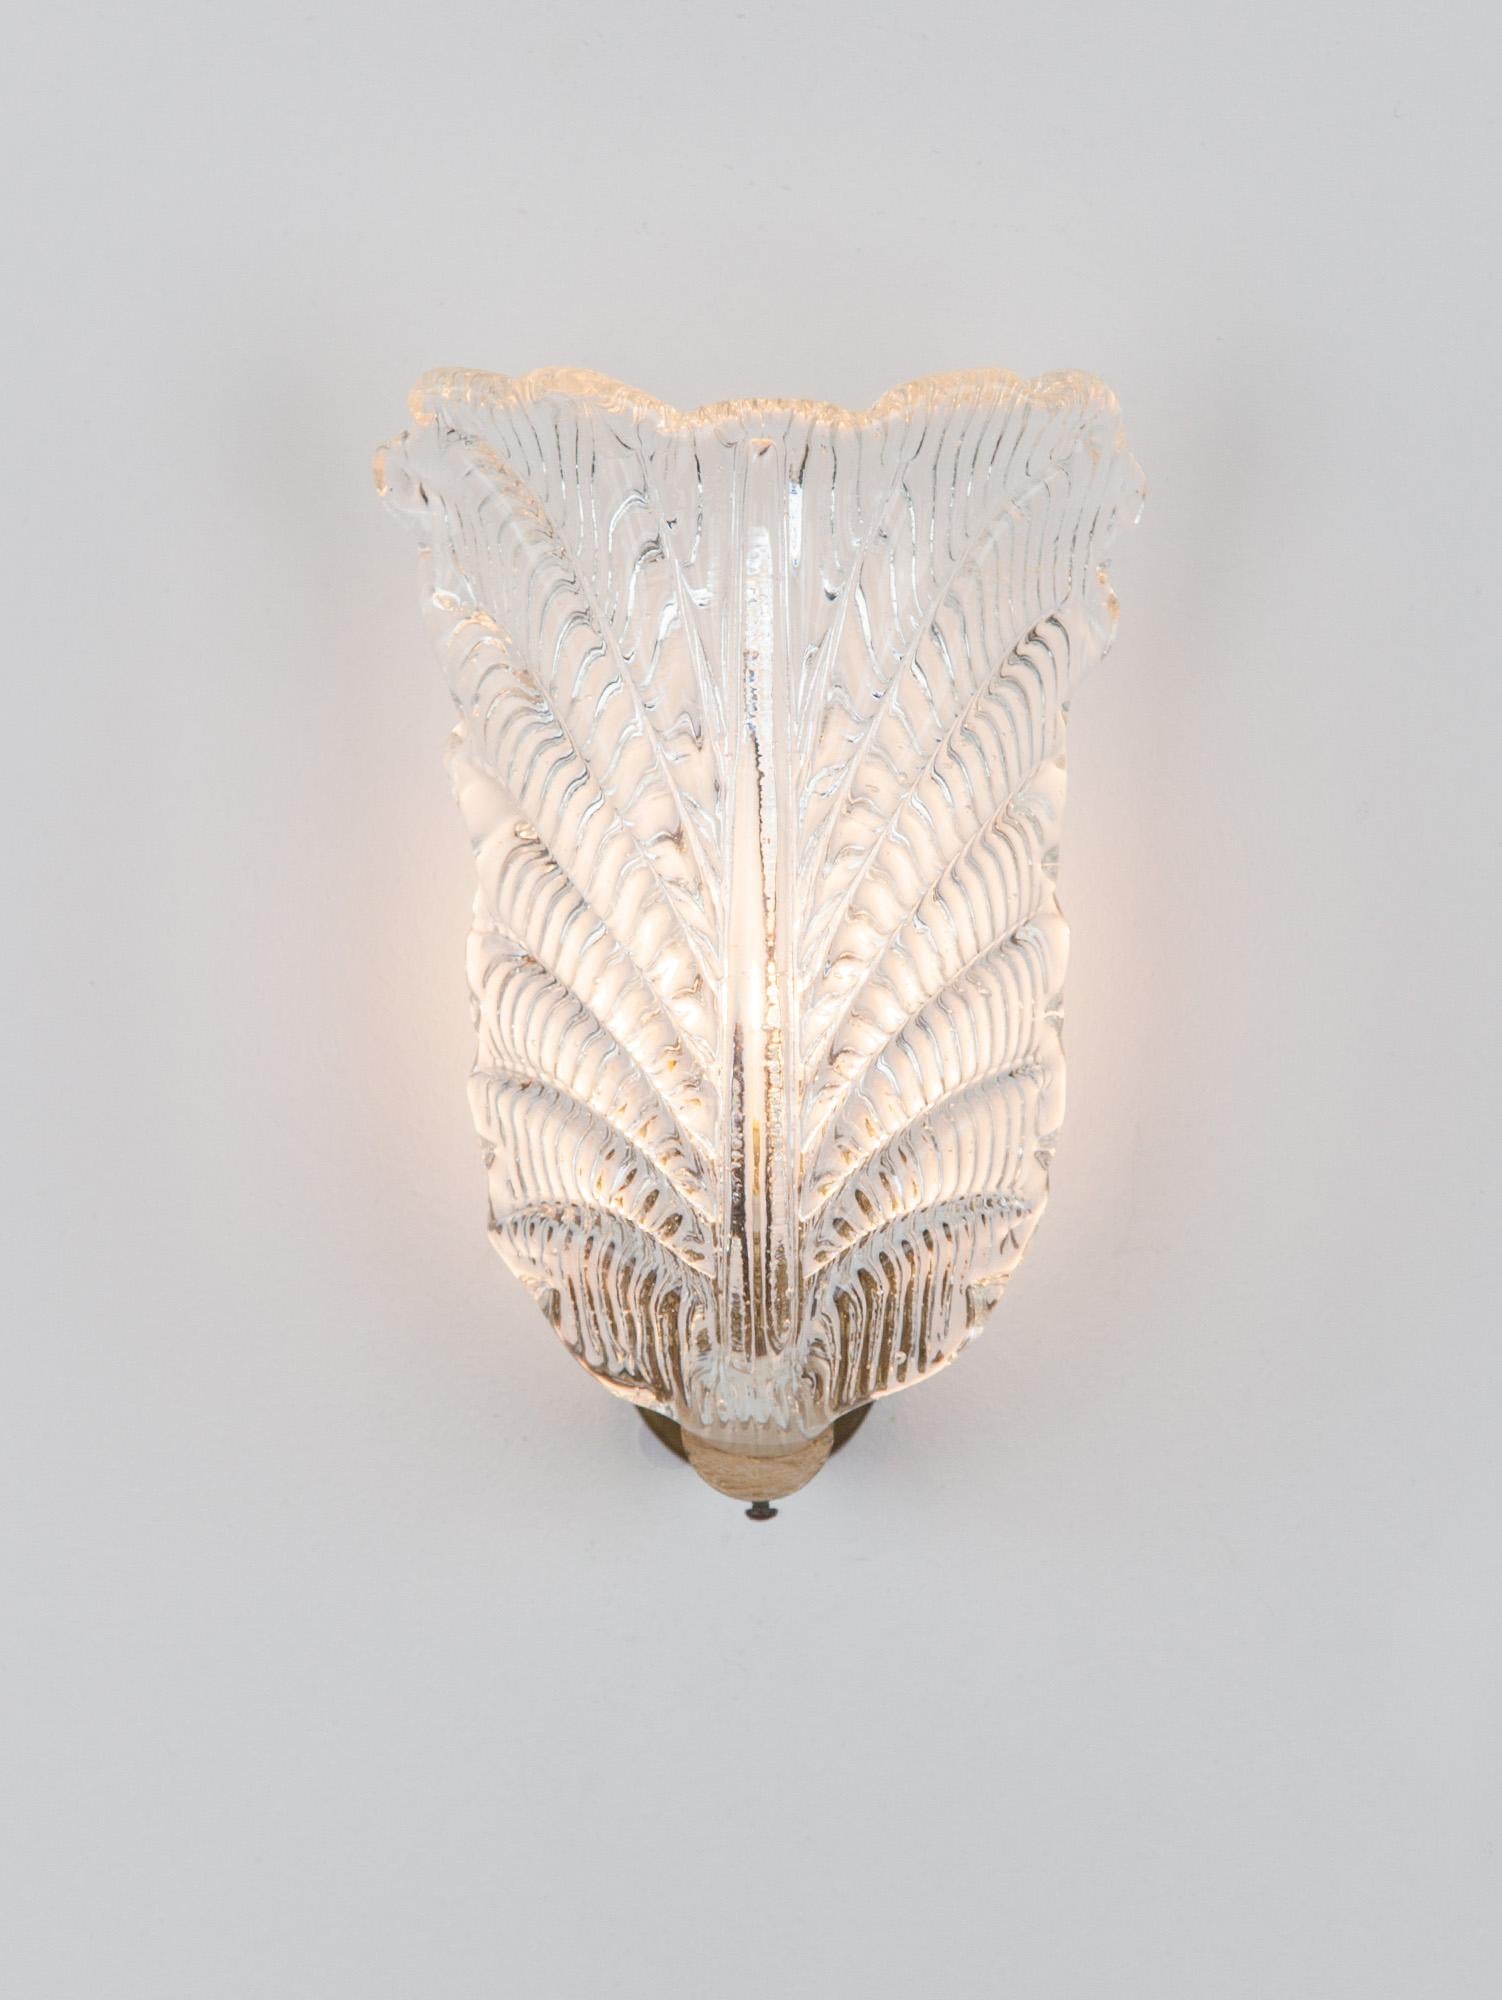 Stunning and unique Barovier Murano glass wall light with brass fixtures and mouth blown molded glass. Lovely intricate detailing in the glass with an organic sculptural shape. Impressive in both size and form this beautiful wall light celebrates